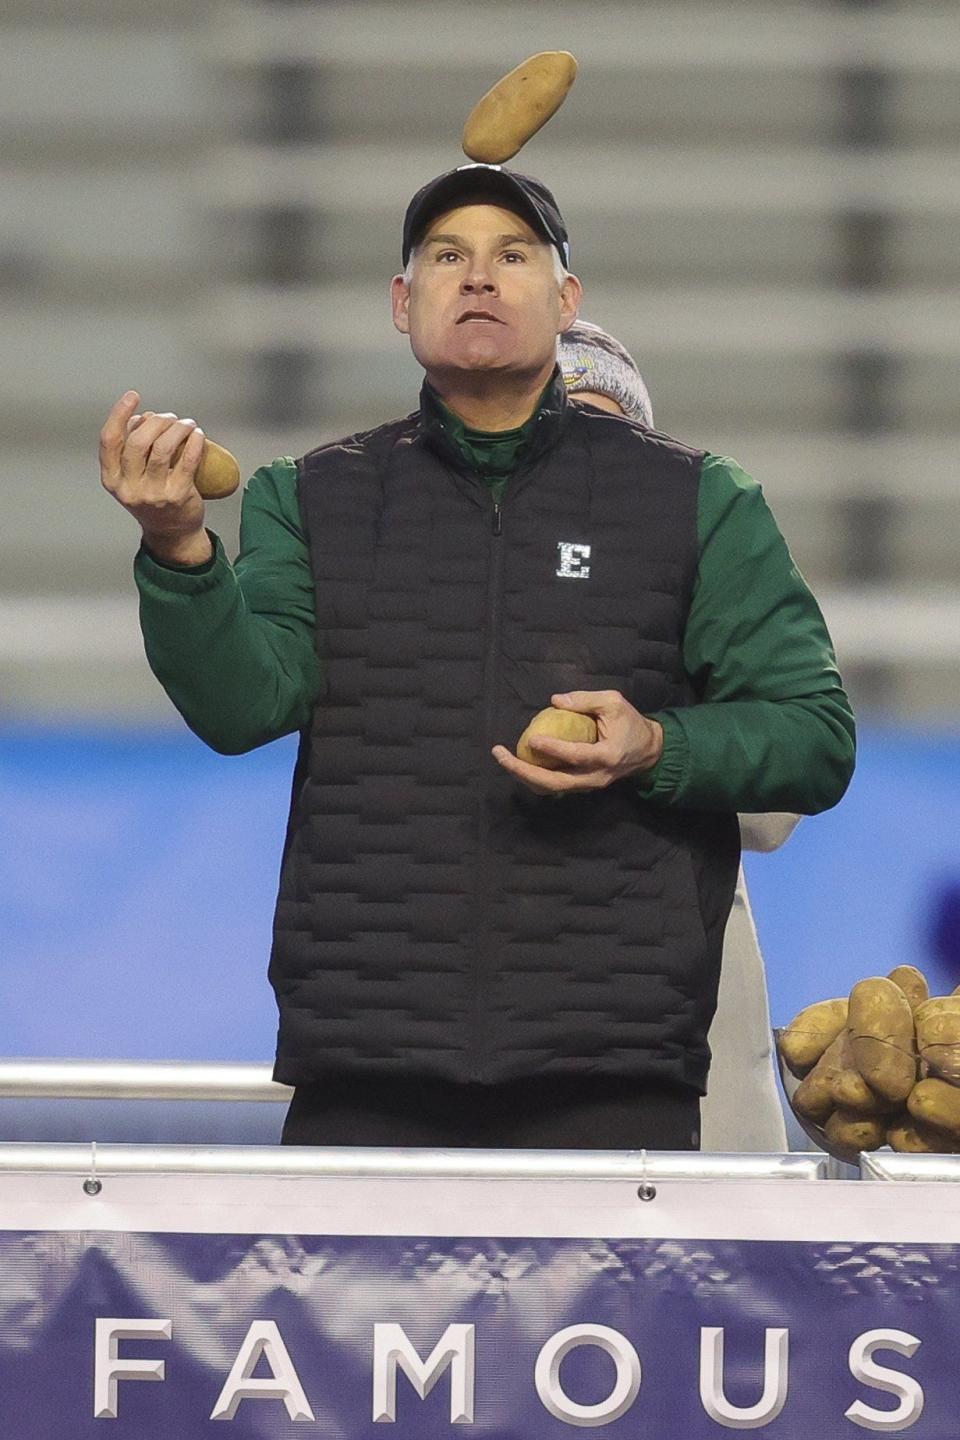 Eastern Michigan coach Chris Creighton juggles potatoes from the Idaho Potato Bowl trophy after the 41-27 win over San Jose State in the Famous Idaho Potato Bowl on Tuesday, Dec. 20, 2022, in Boise, Idaho.